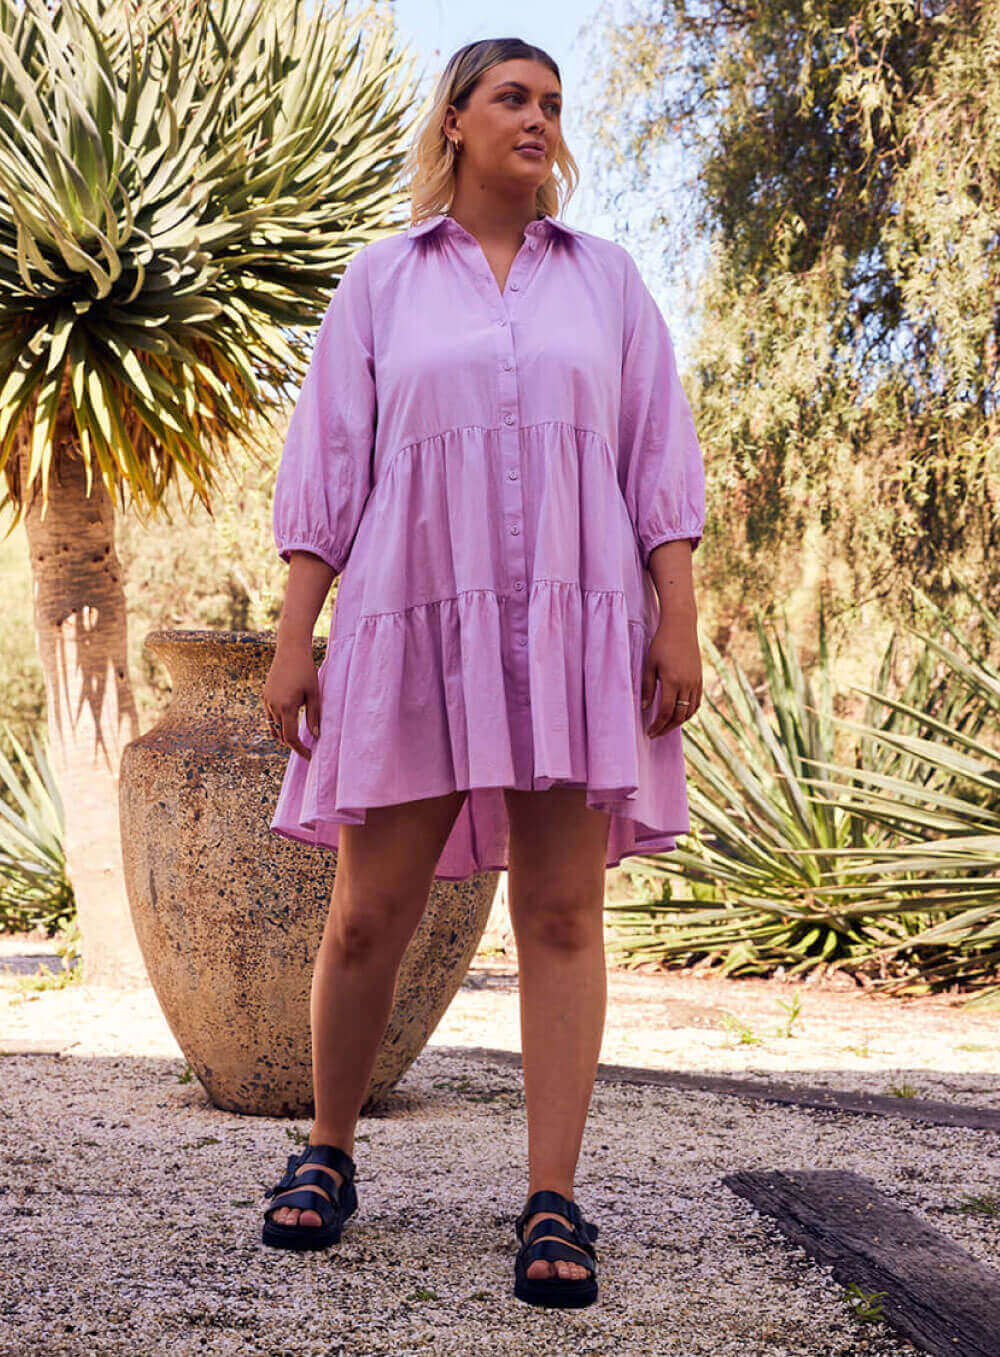 The Jasmine Dress in lilac is made of 100% soft cotton, featuring a collar neck, 3/4 sleeve with elastic cuff button through front all the way to the hem, tiered layers through the body, midi in length and 2 side pockets